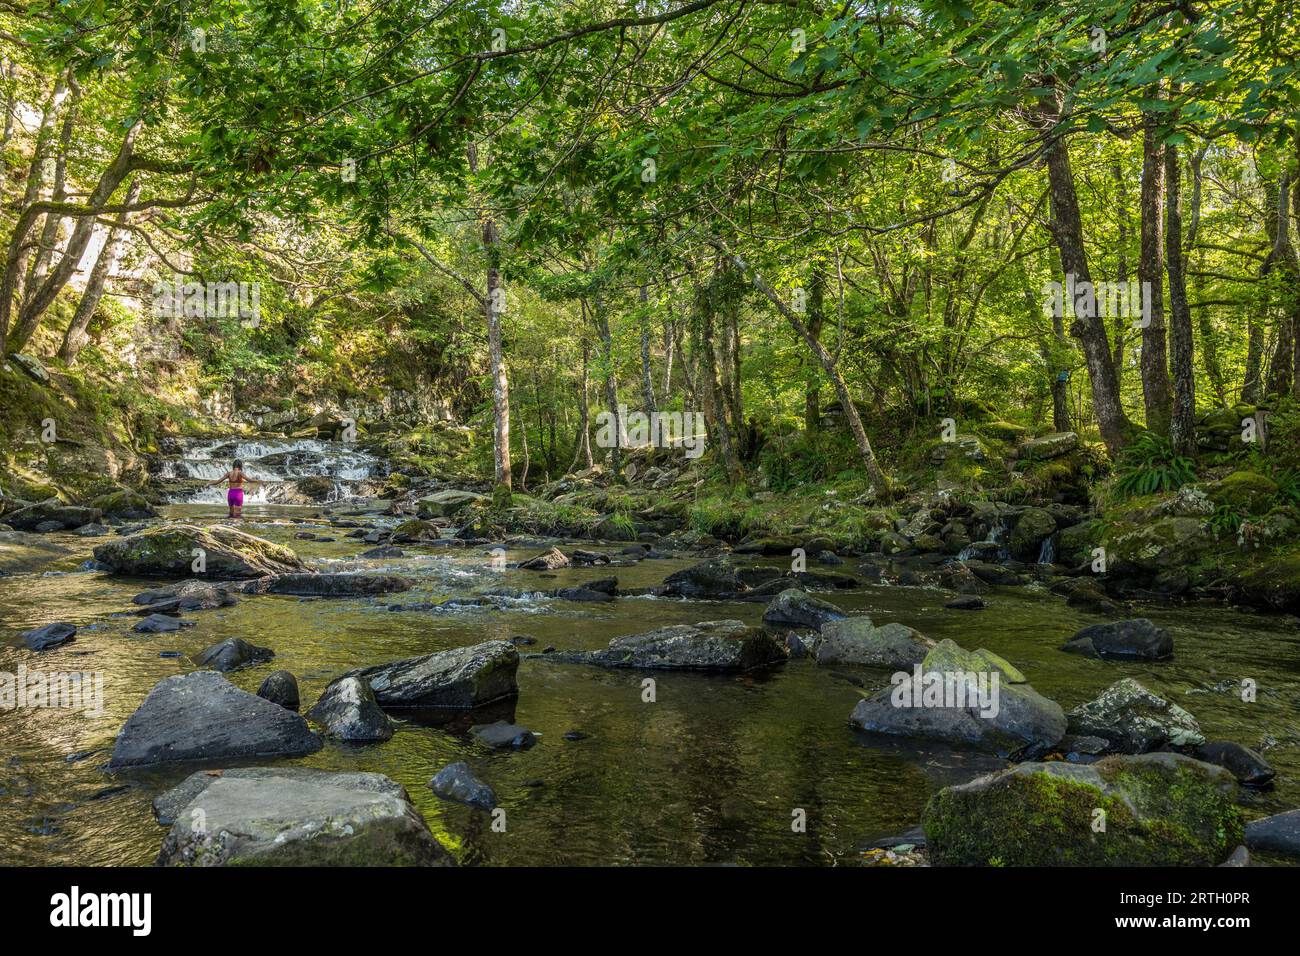 Nantcol river and waterfalls in a woodland setting. Stock Photo